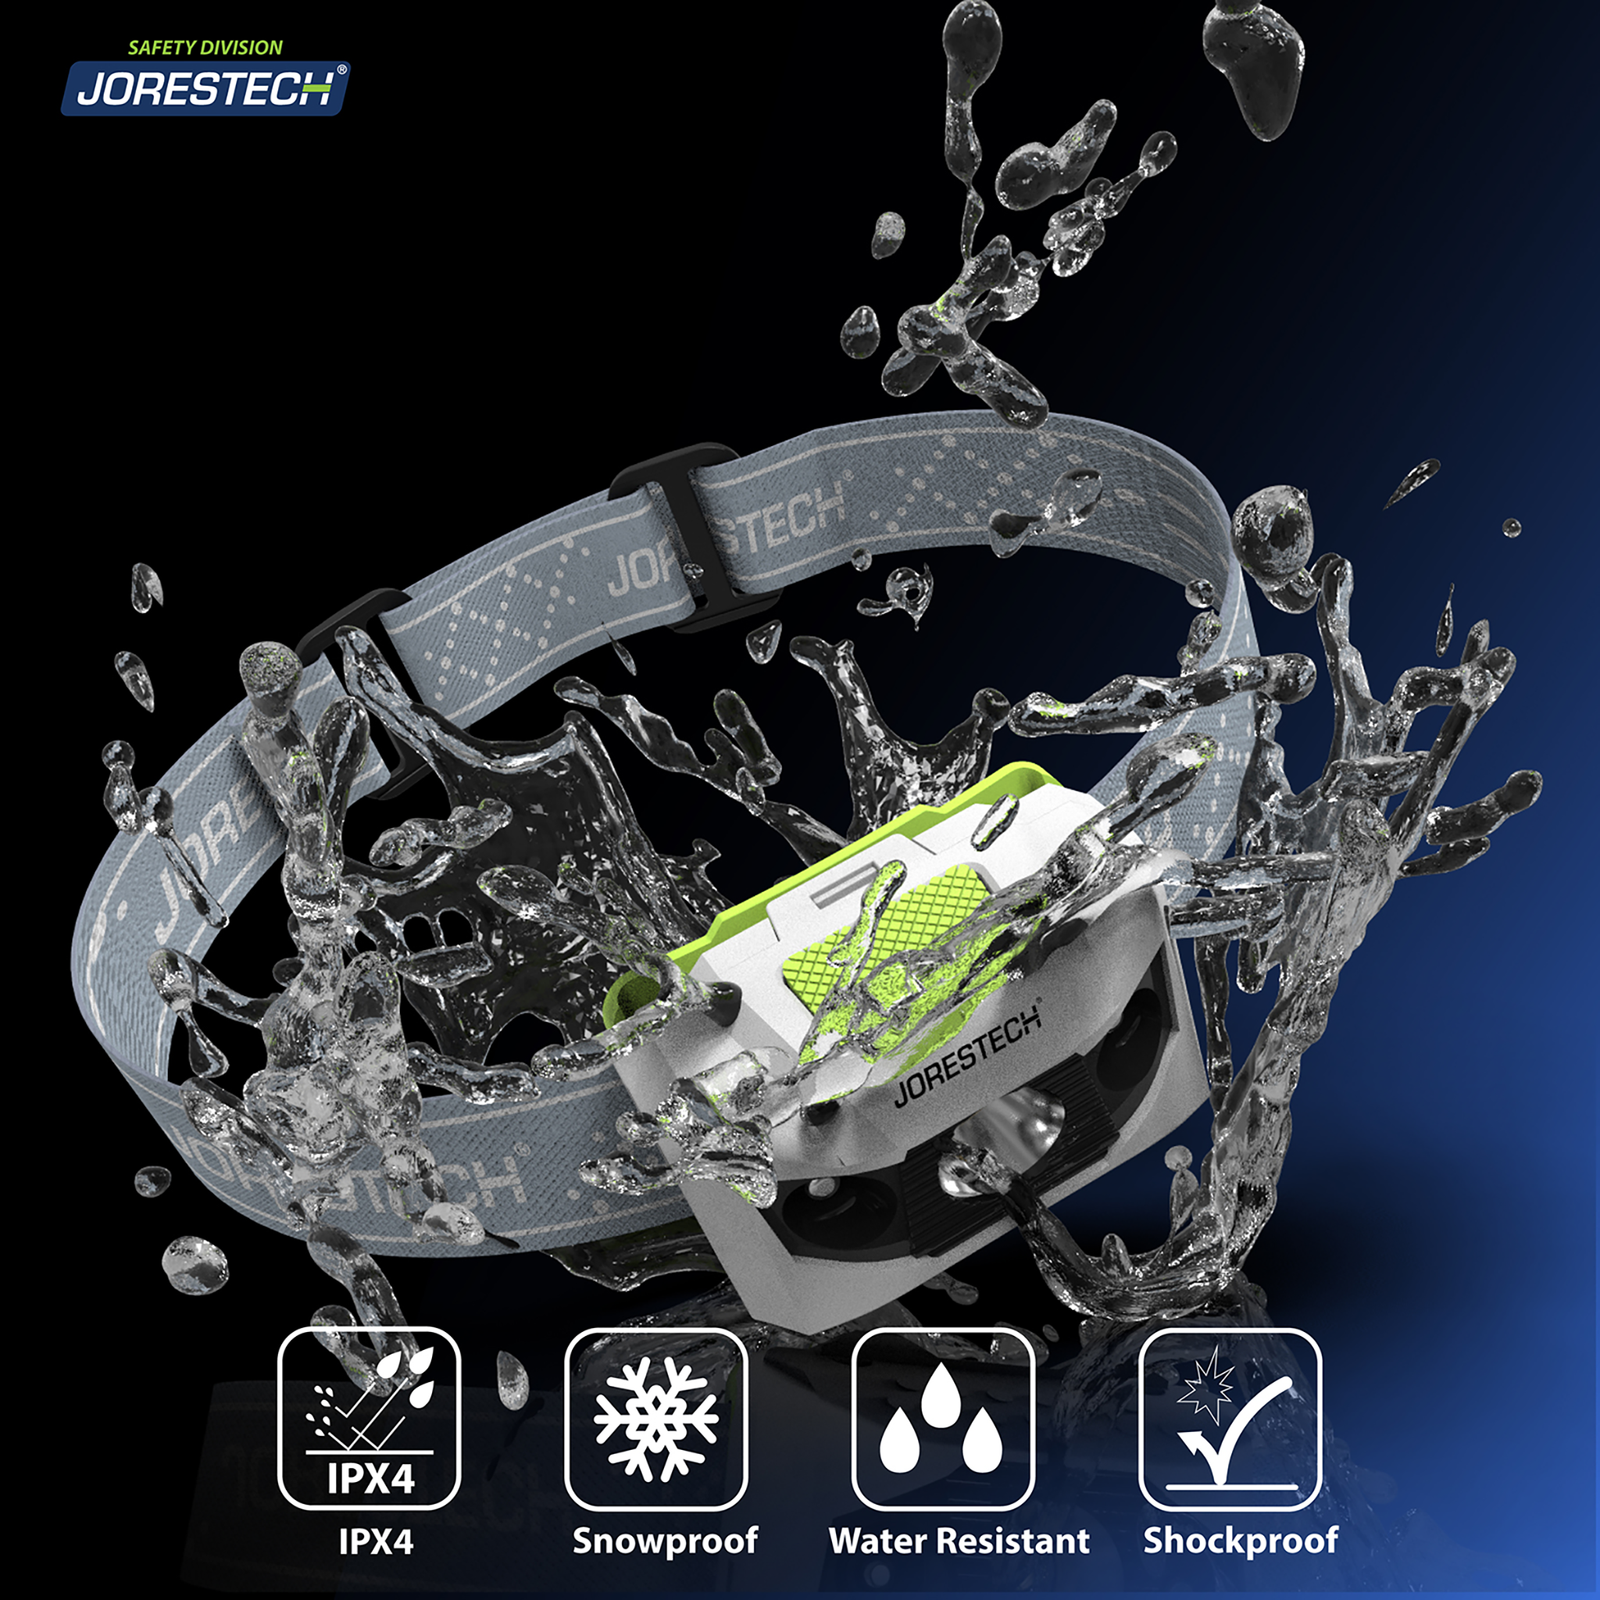 White head lamp been splashed by water to show that the are water resistant, snow resistant and shockproof